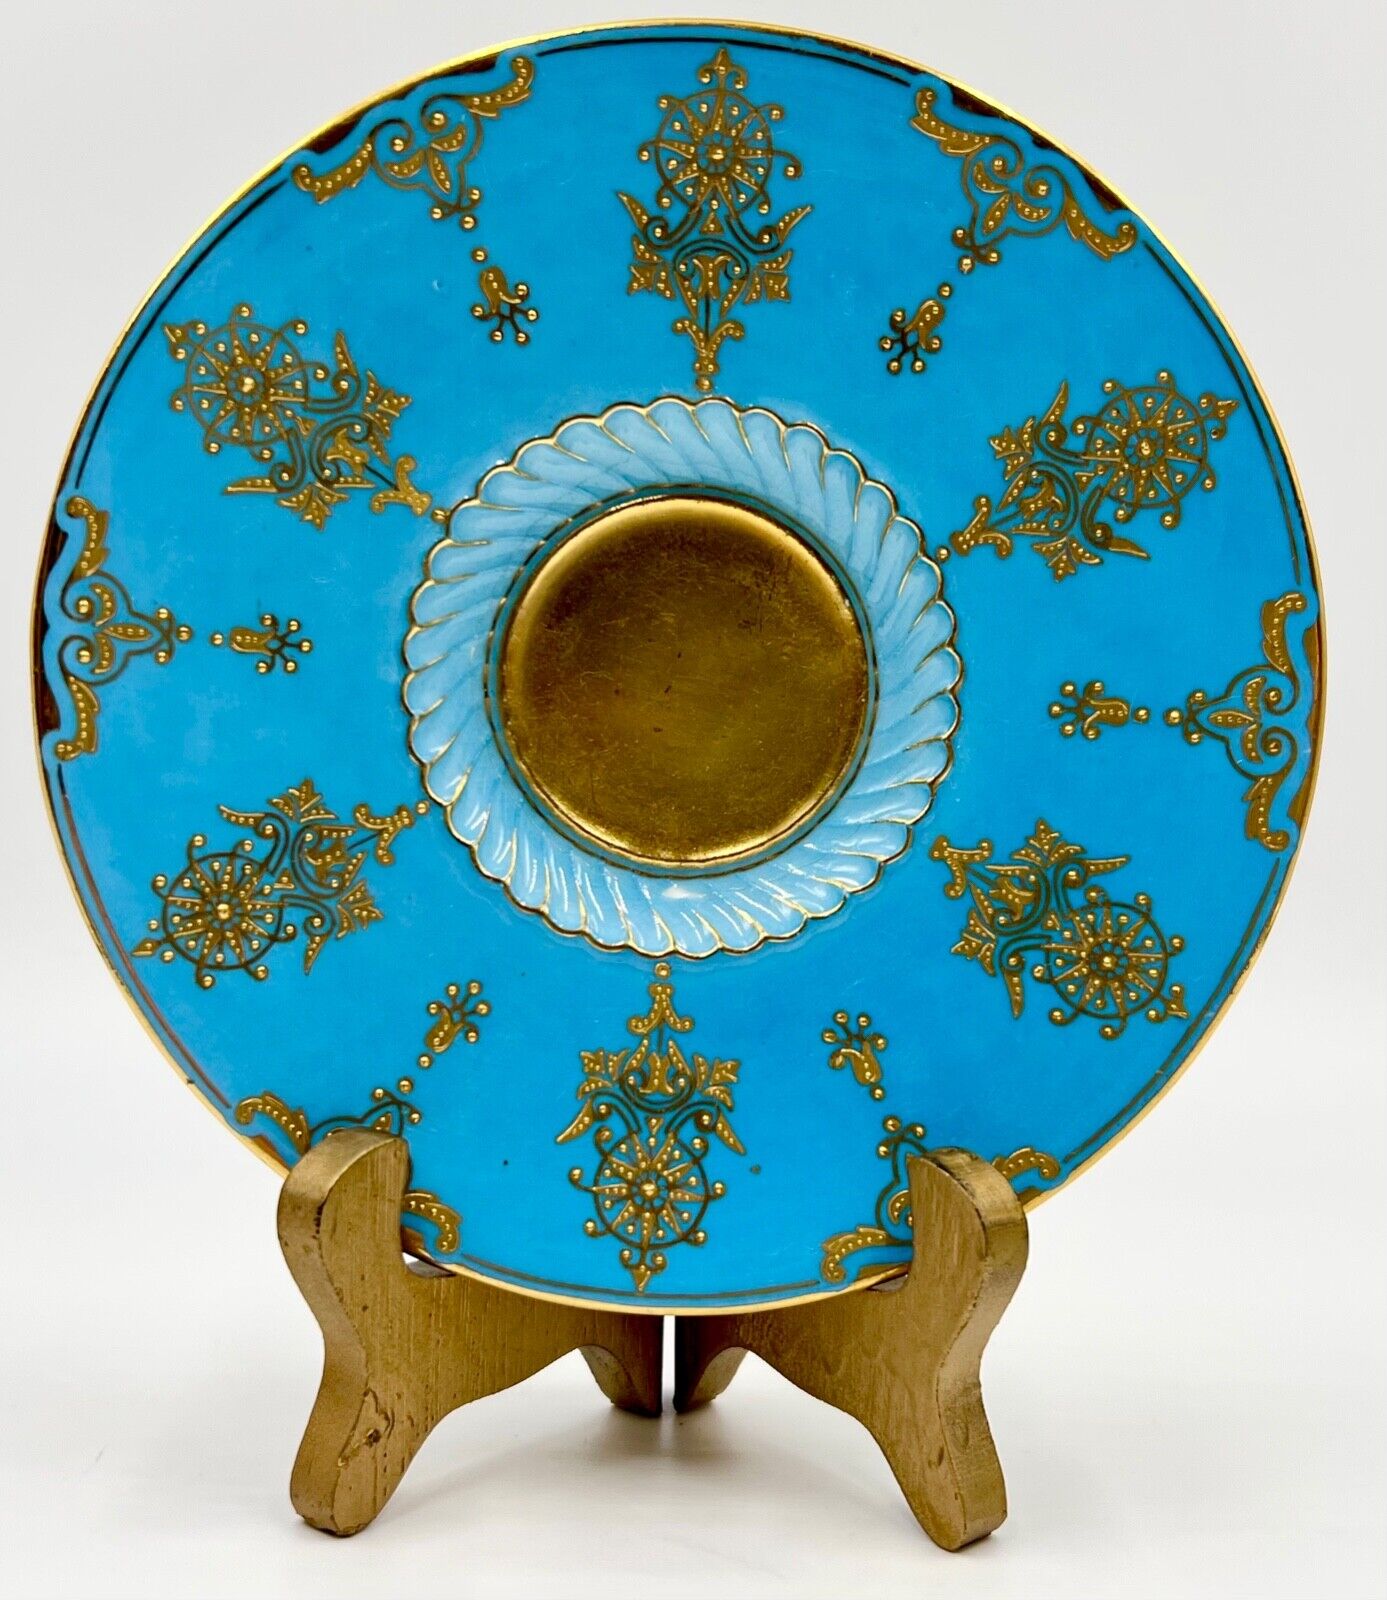 ANTIQUE COALPORT 5 3/4in GOLD ENCRUSTED TURQUOISE PLATE OR SAUCER 